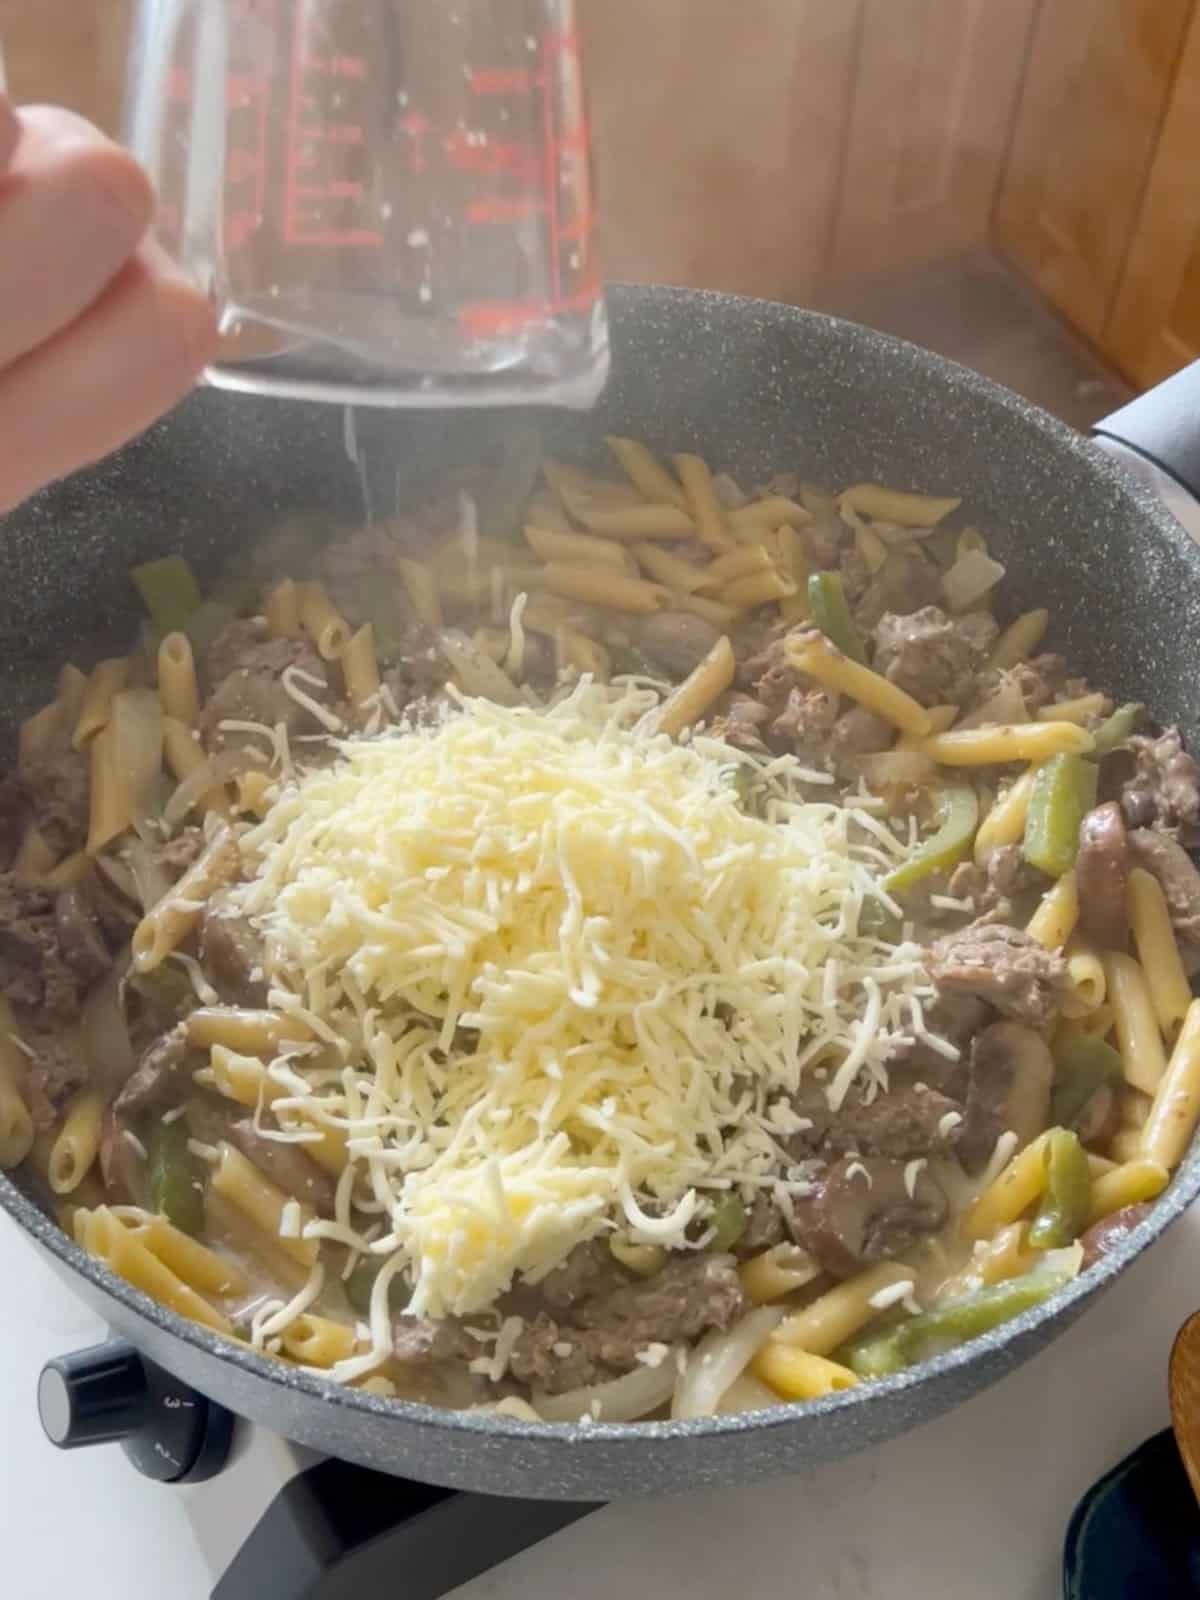 Shredded cheese added to skillet of pasta.